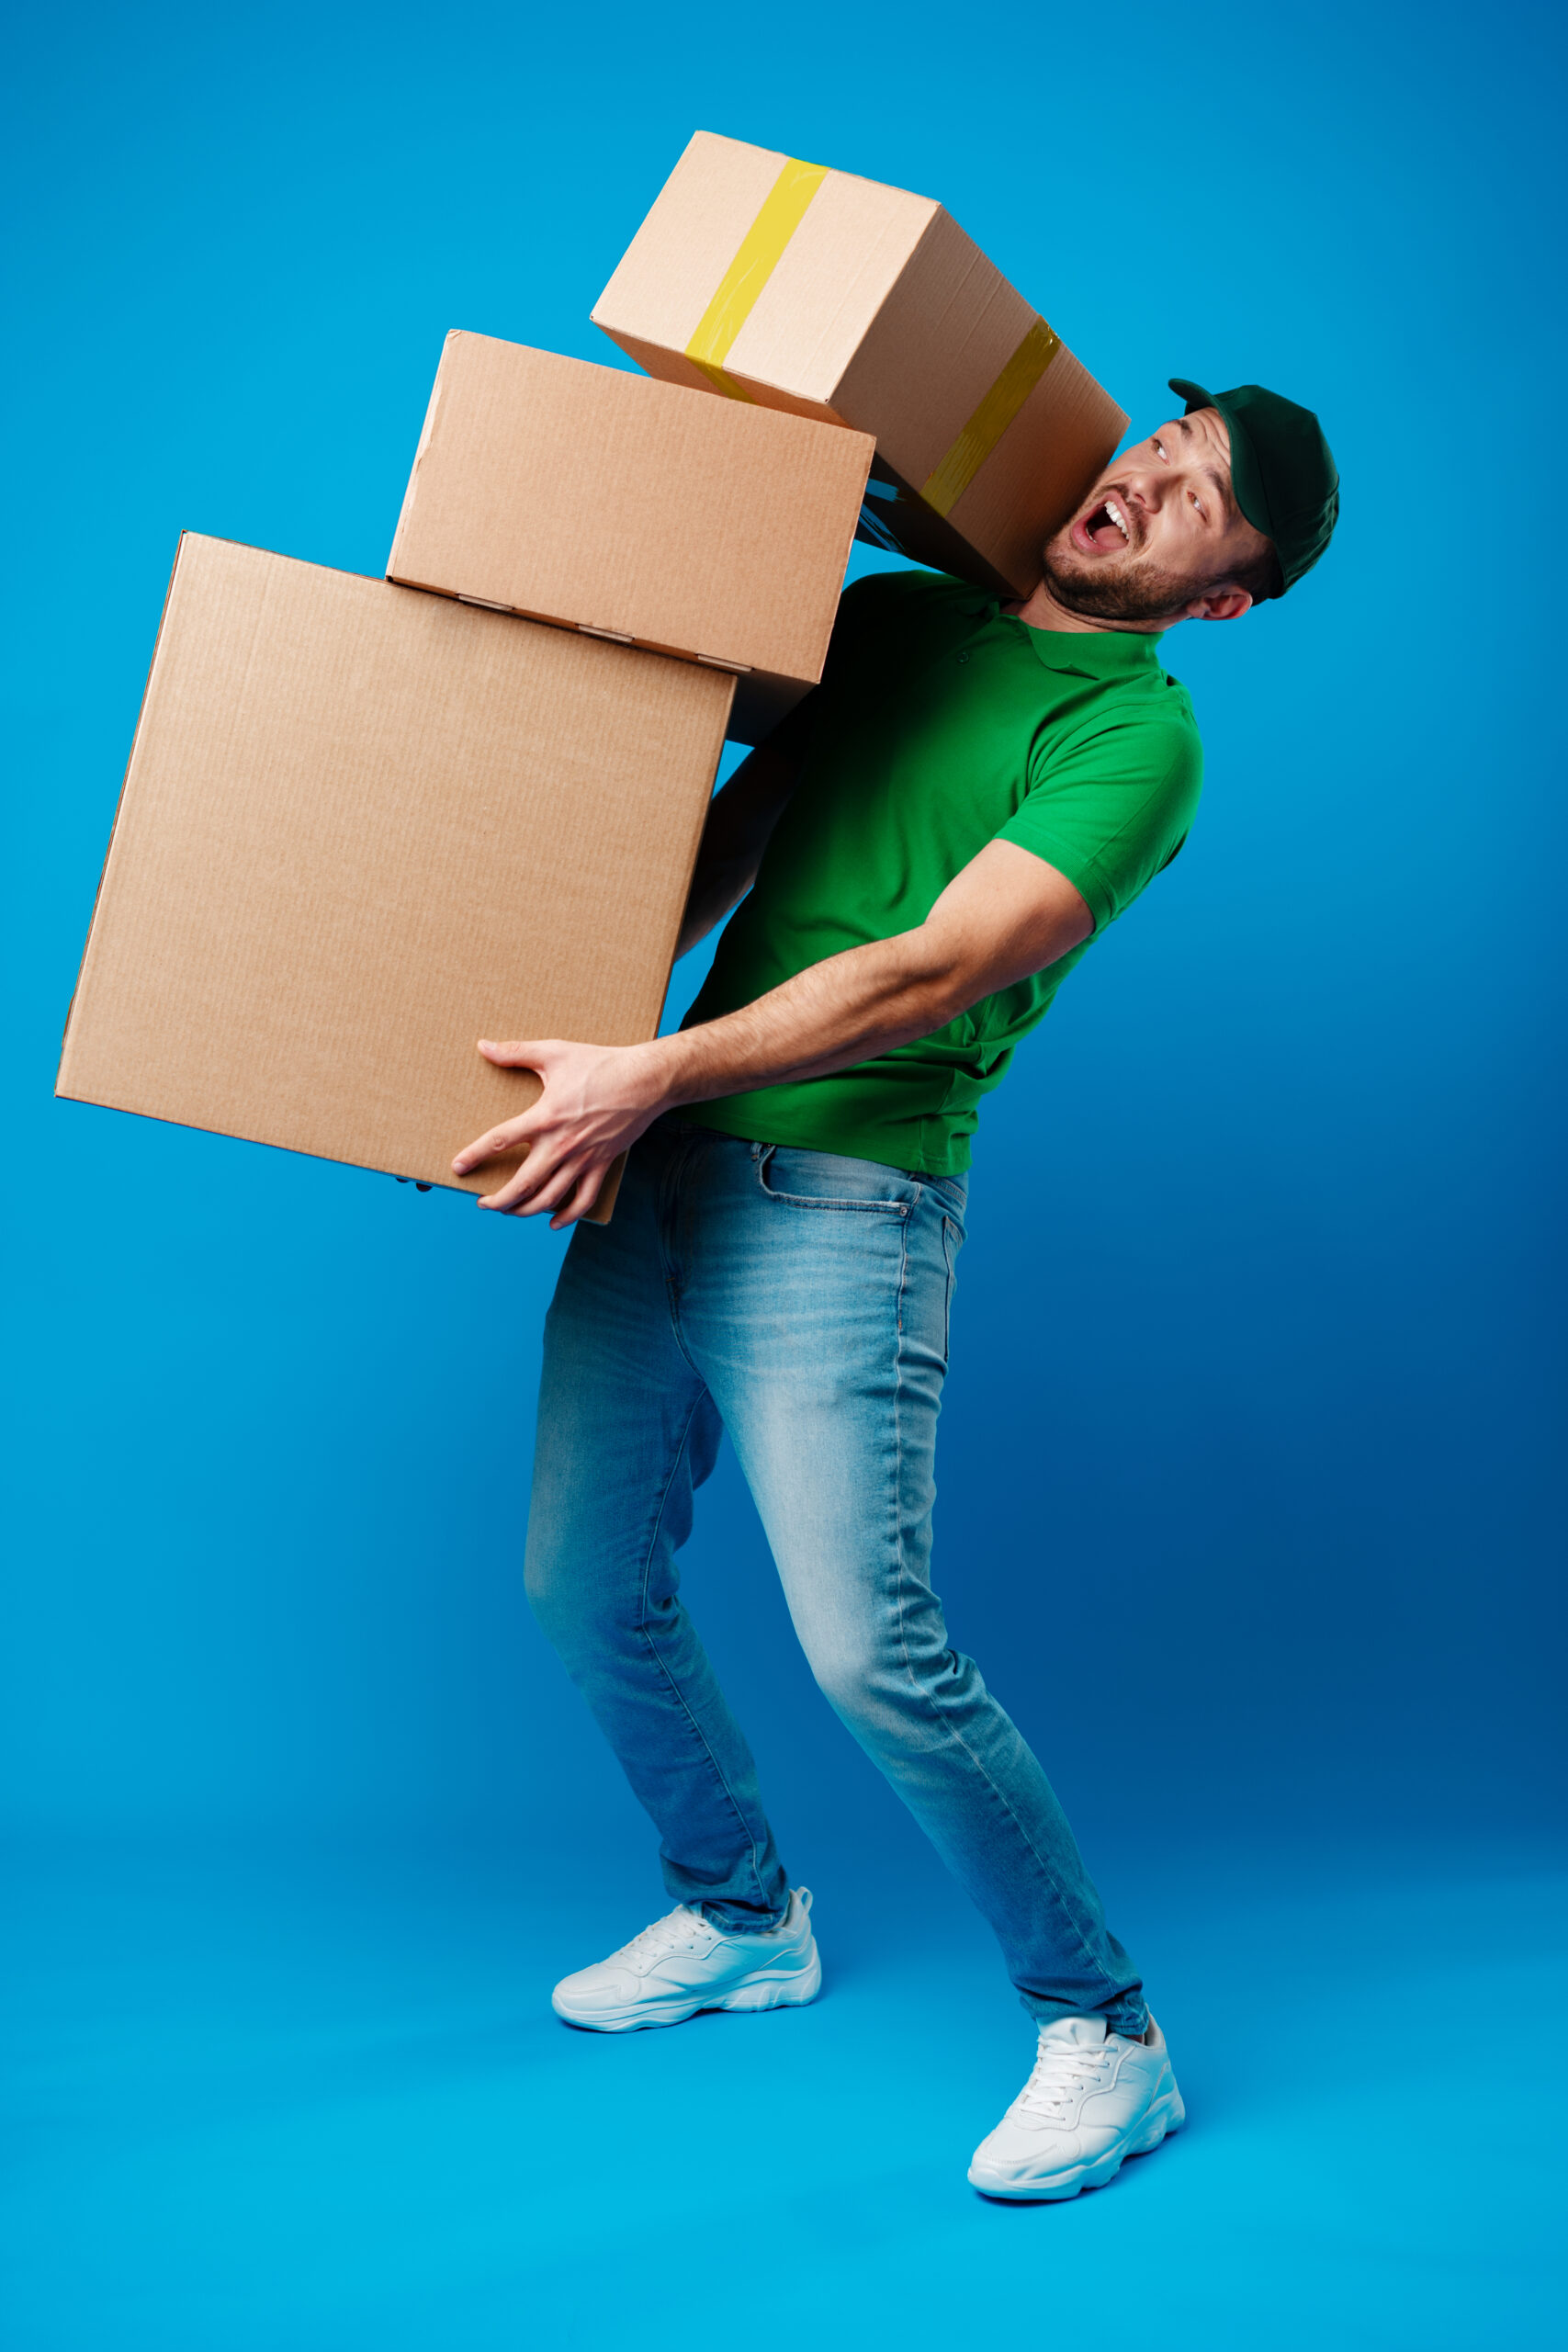 Packers and Movers Service in Faridabad